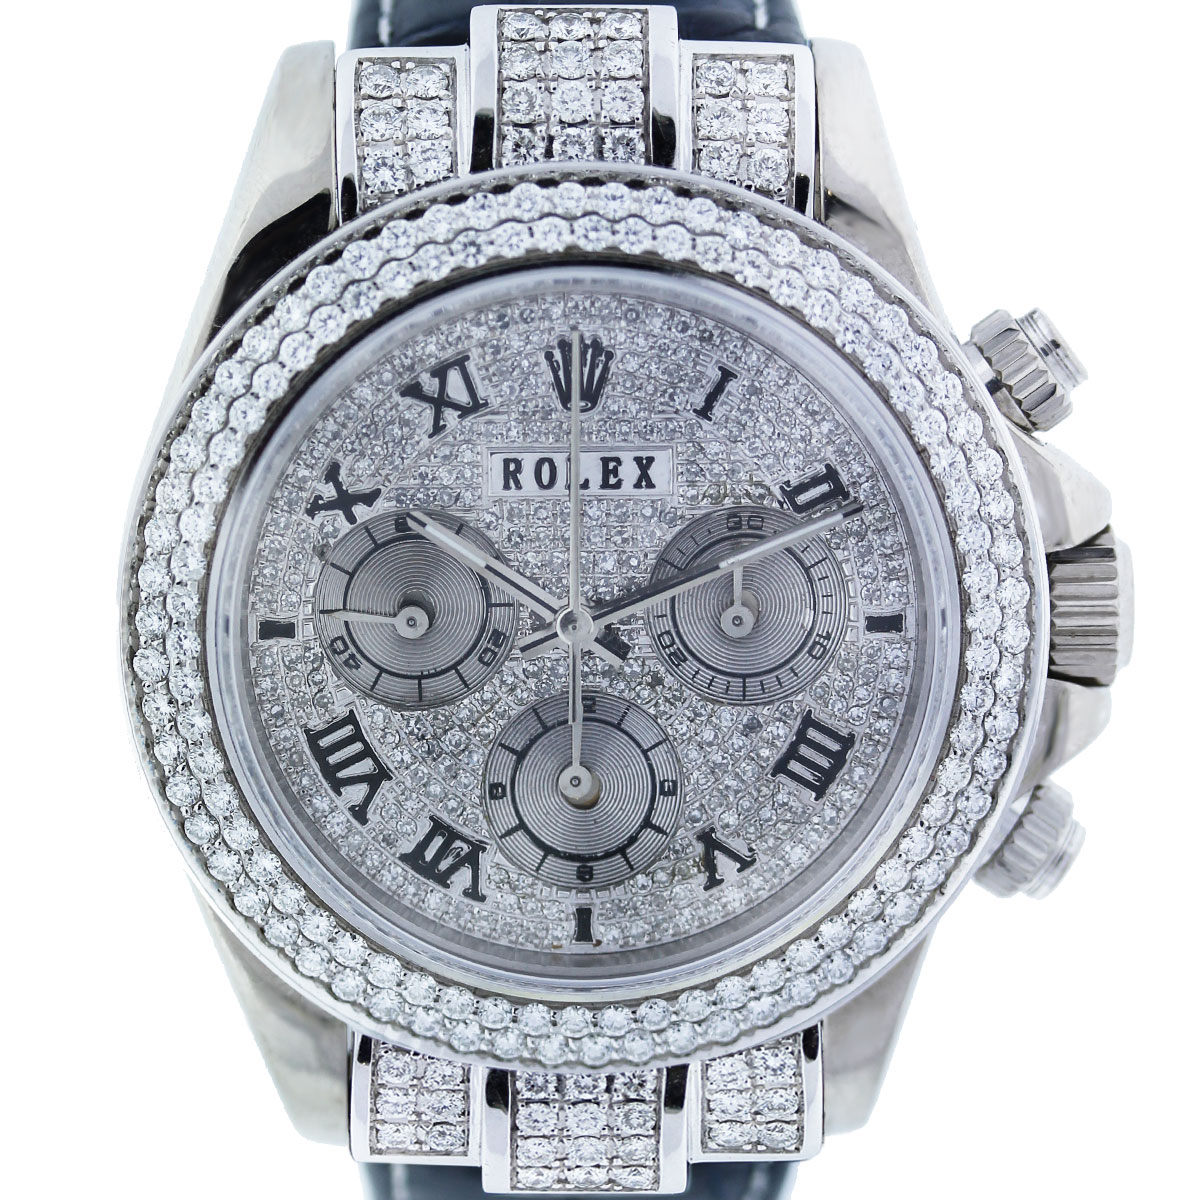 Watches Daytona White Gold Diamond Bezel Arena Pile Top 10 Most Expensive Rolex Diamond Watches For Men And Women